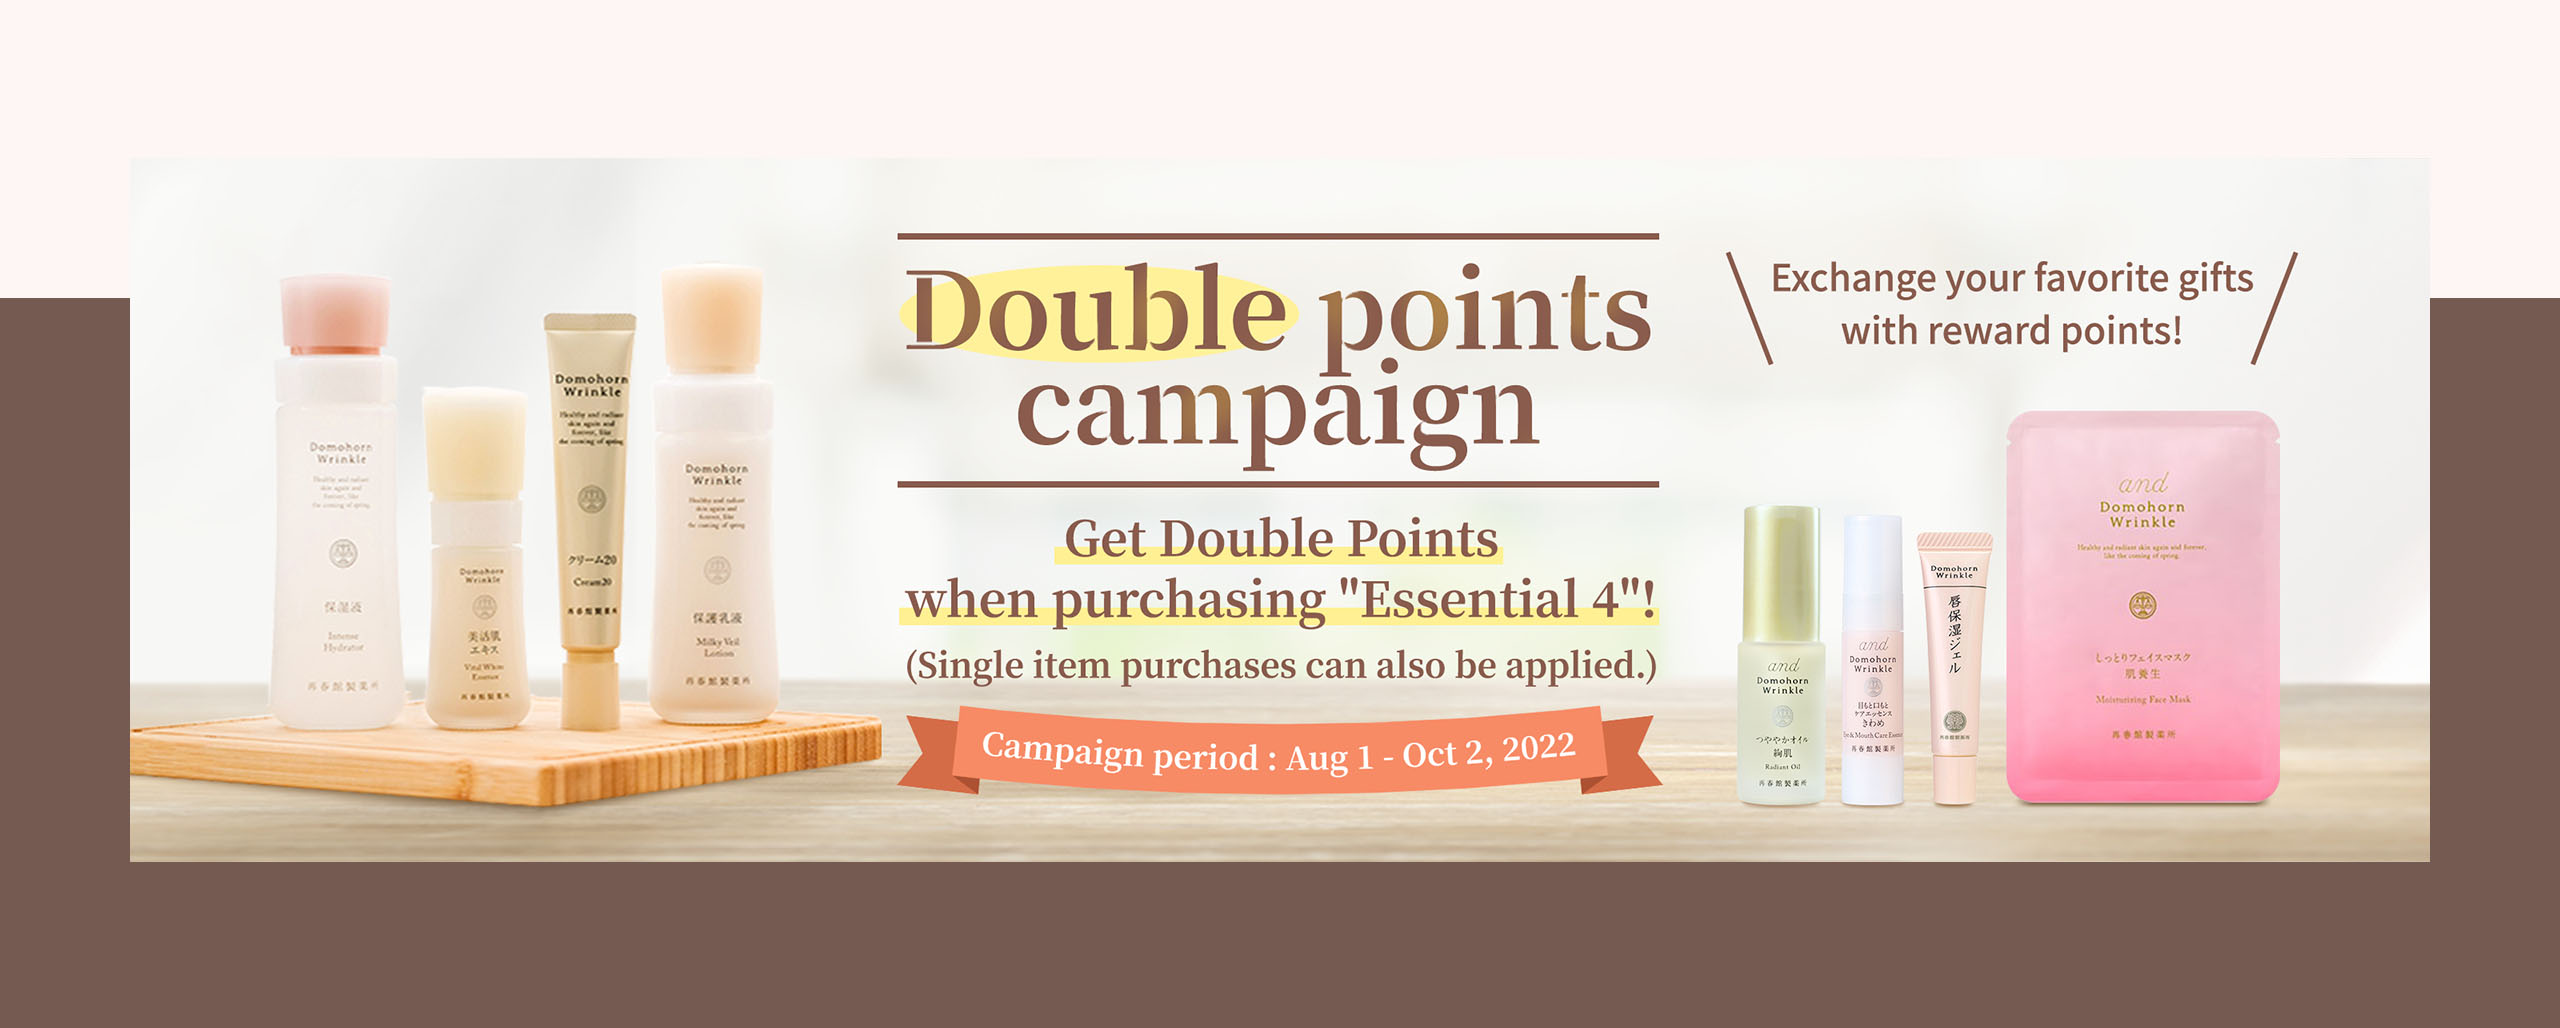 Double points campaign. Get Double Points when purchasing 